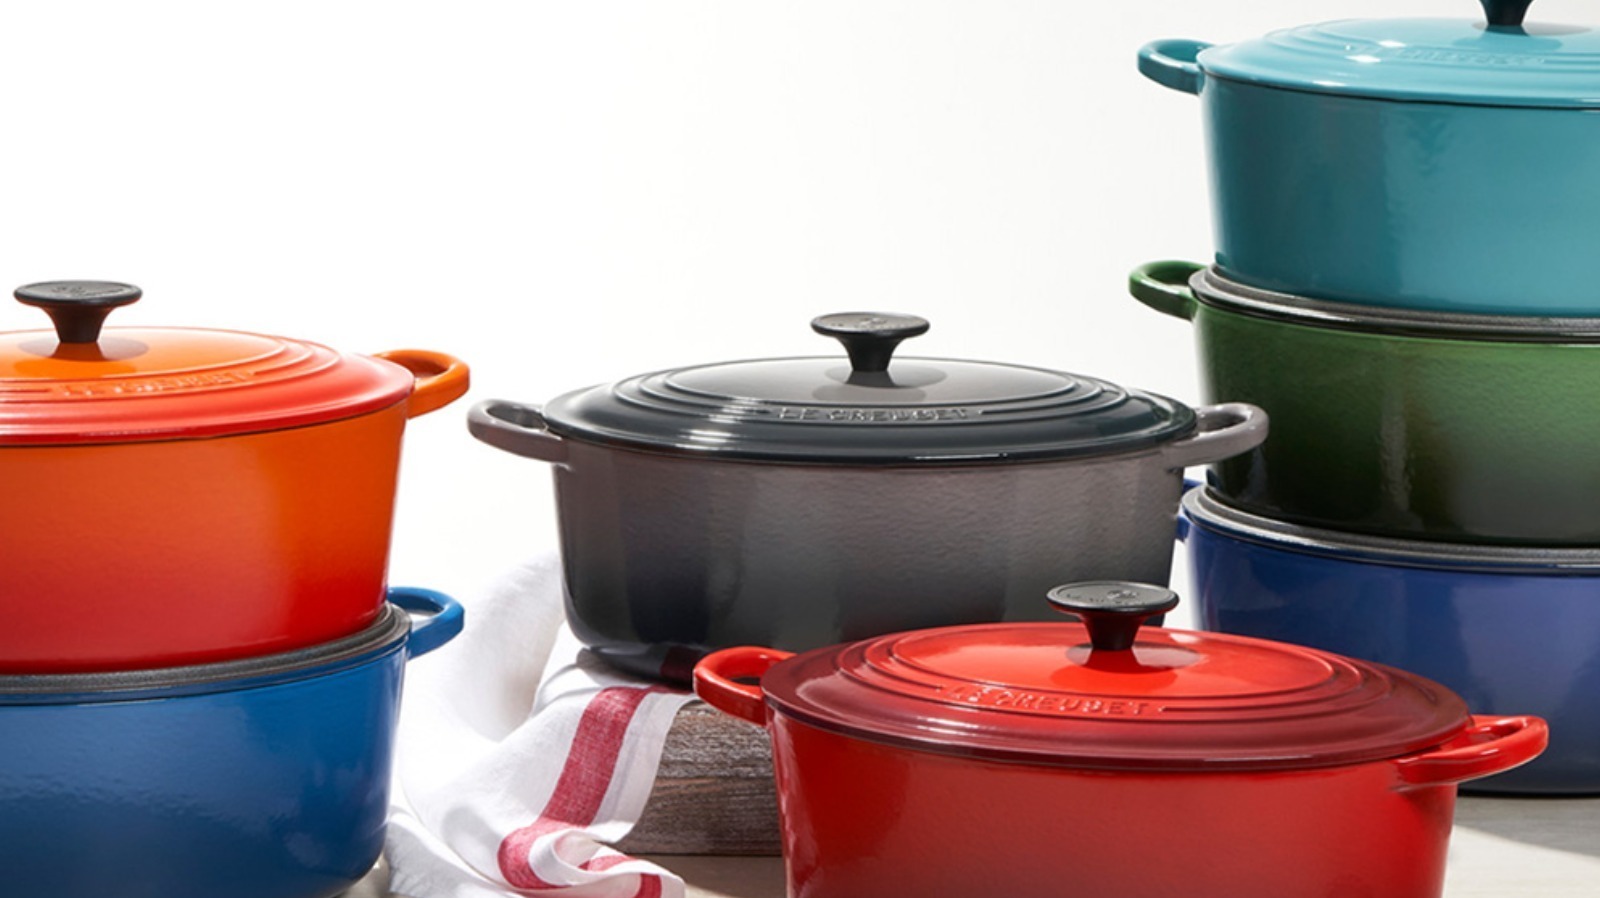 https://www.mashed.com/img/gallery/le-creuset-is-adding-an-earthy-new-color-option-for-its-cookware/l-intro-1648202698.jpg